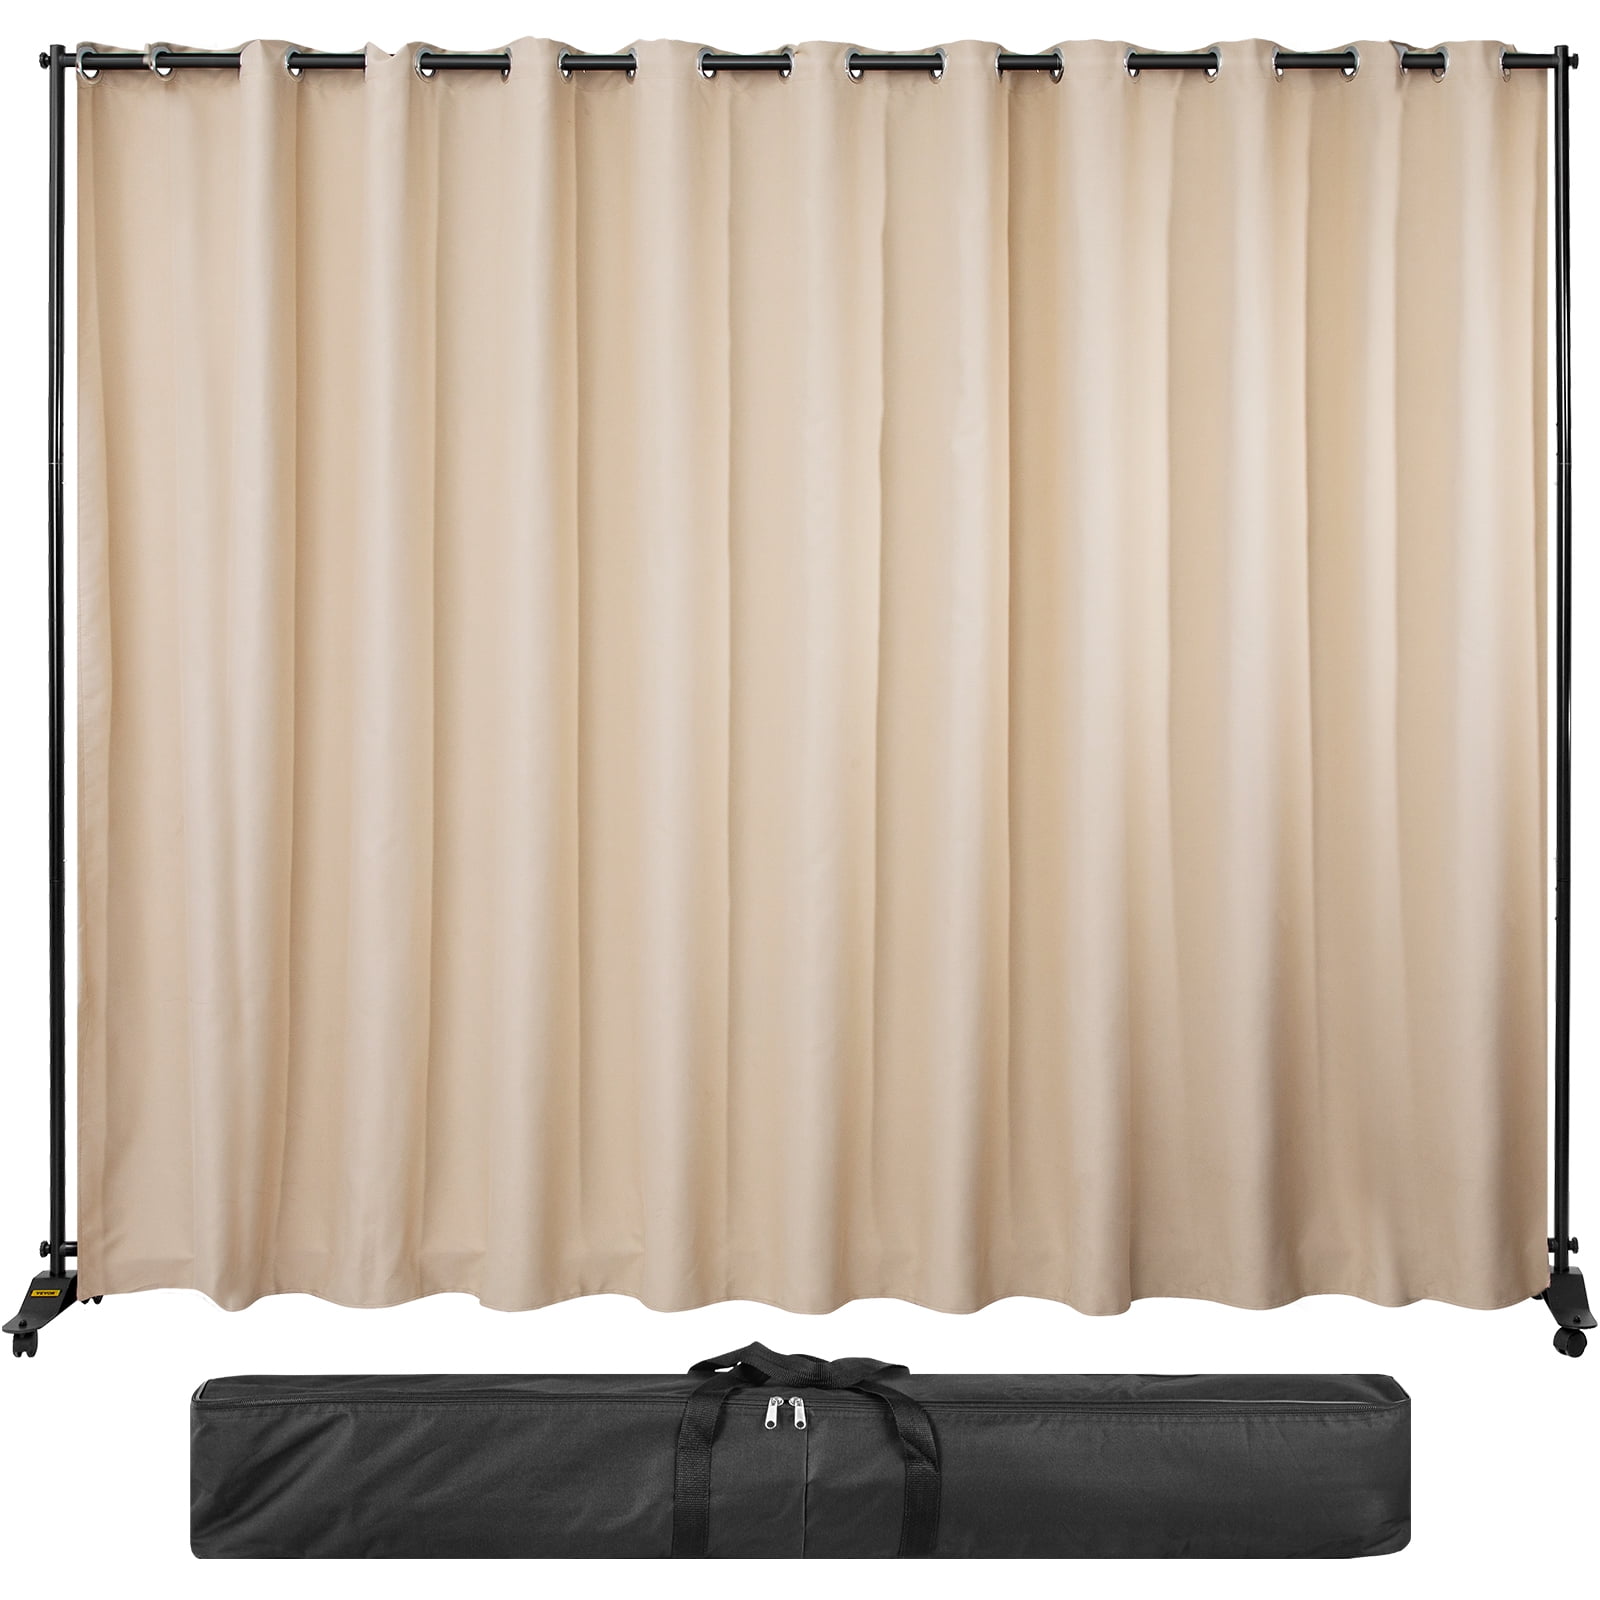 Non-FR Tan Curtain/Stage Backdrop/Partition 10 H x 10 W 